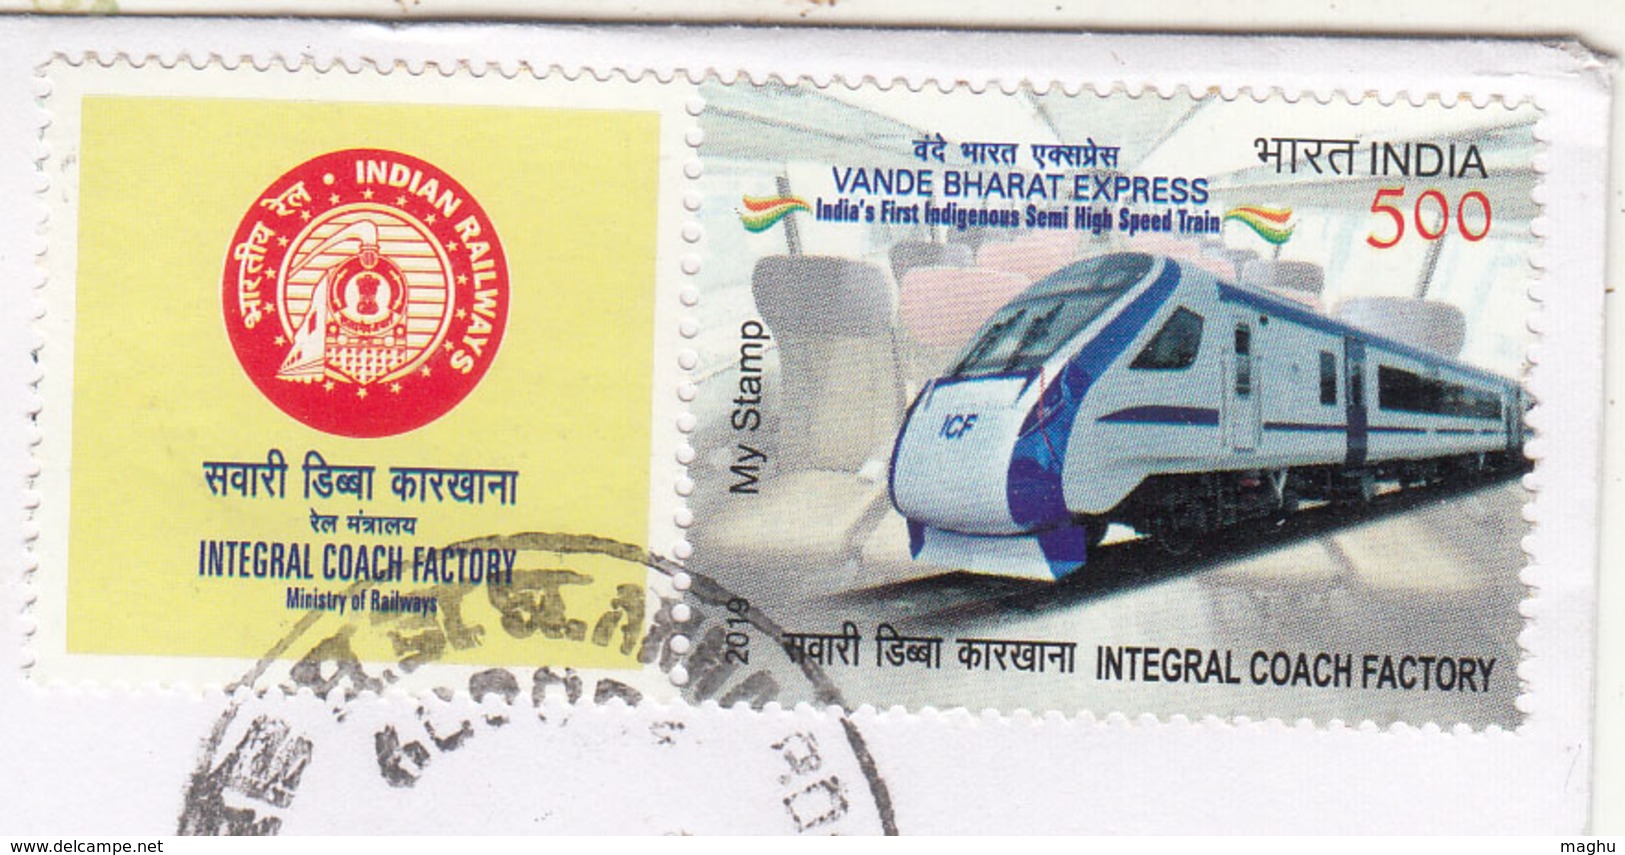 Postal Used My Stamp India 2019, Customized Issue, ICF Coach Factory, Train, Vande Bharat Express - Trenes